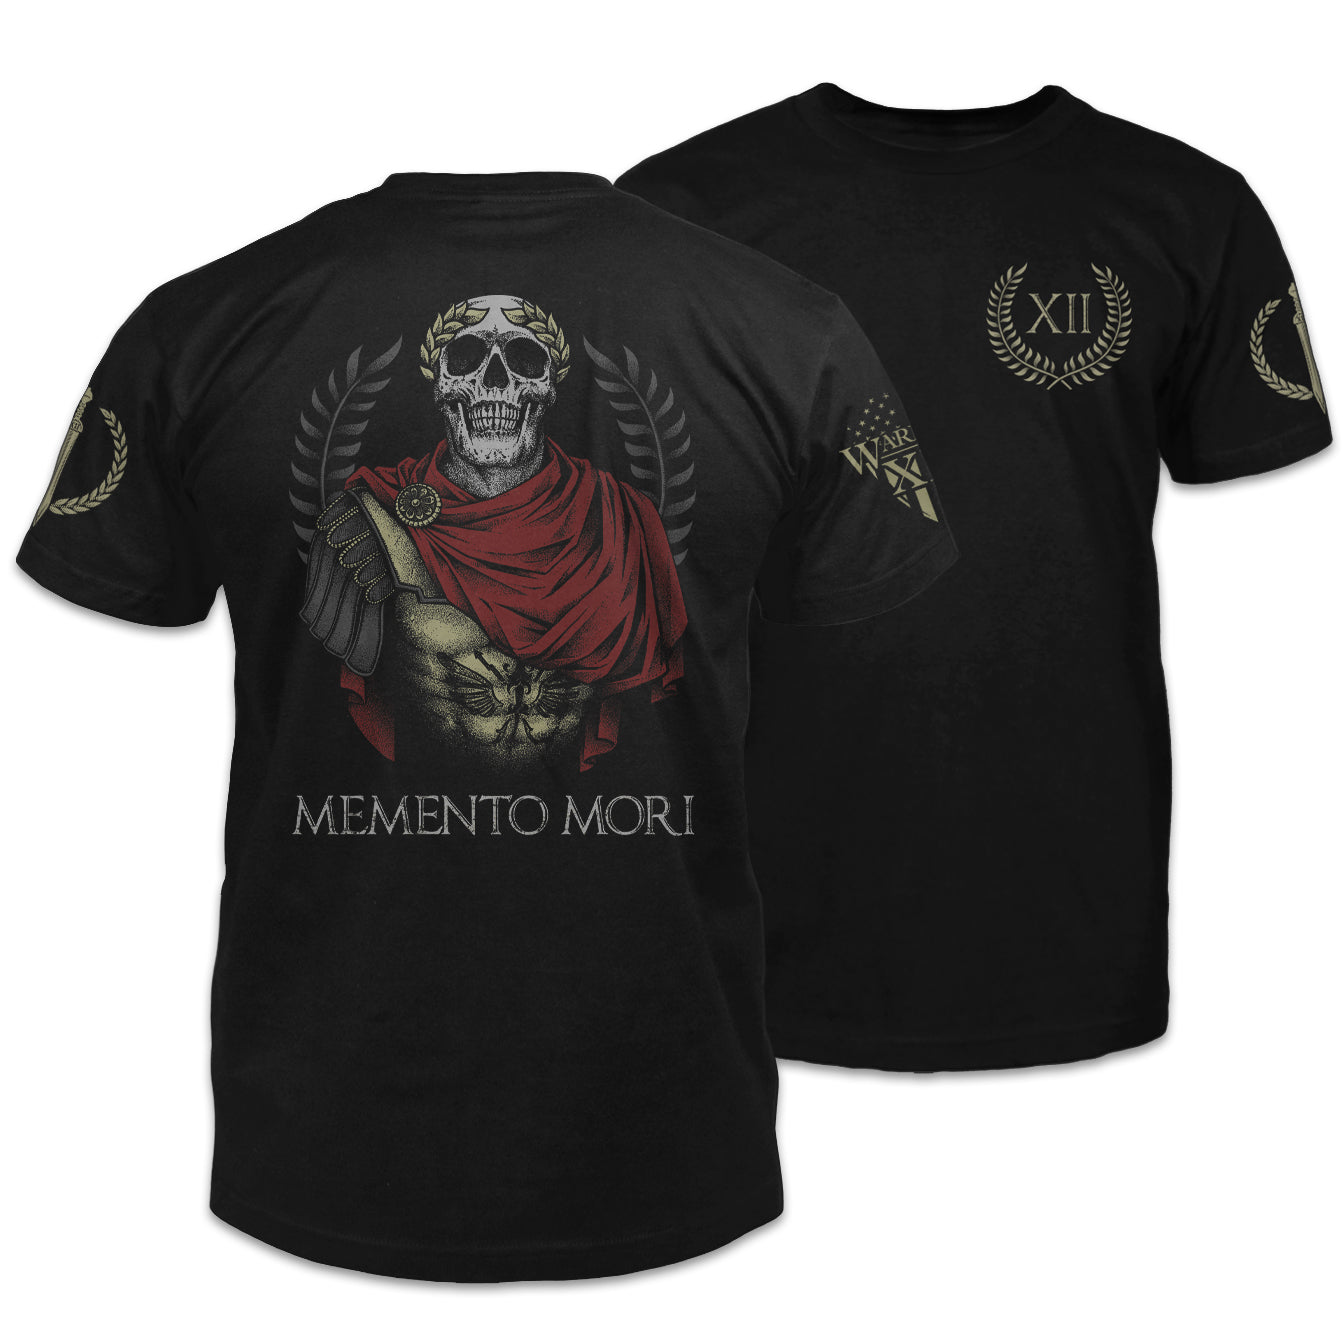 Front & back black t-shirt with the words "Memento Mori" features a roman general and pays tribute to the practice of reflecting on one's mortality printed on the shirt. 